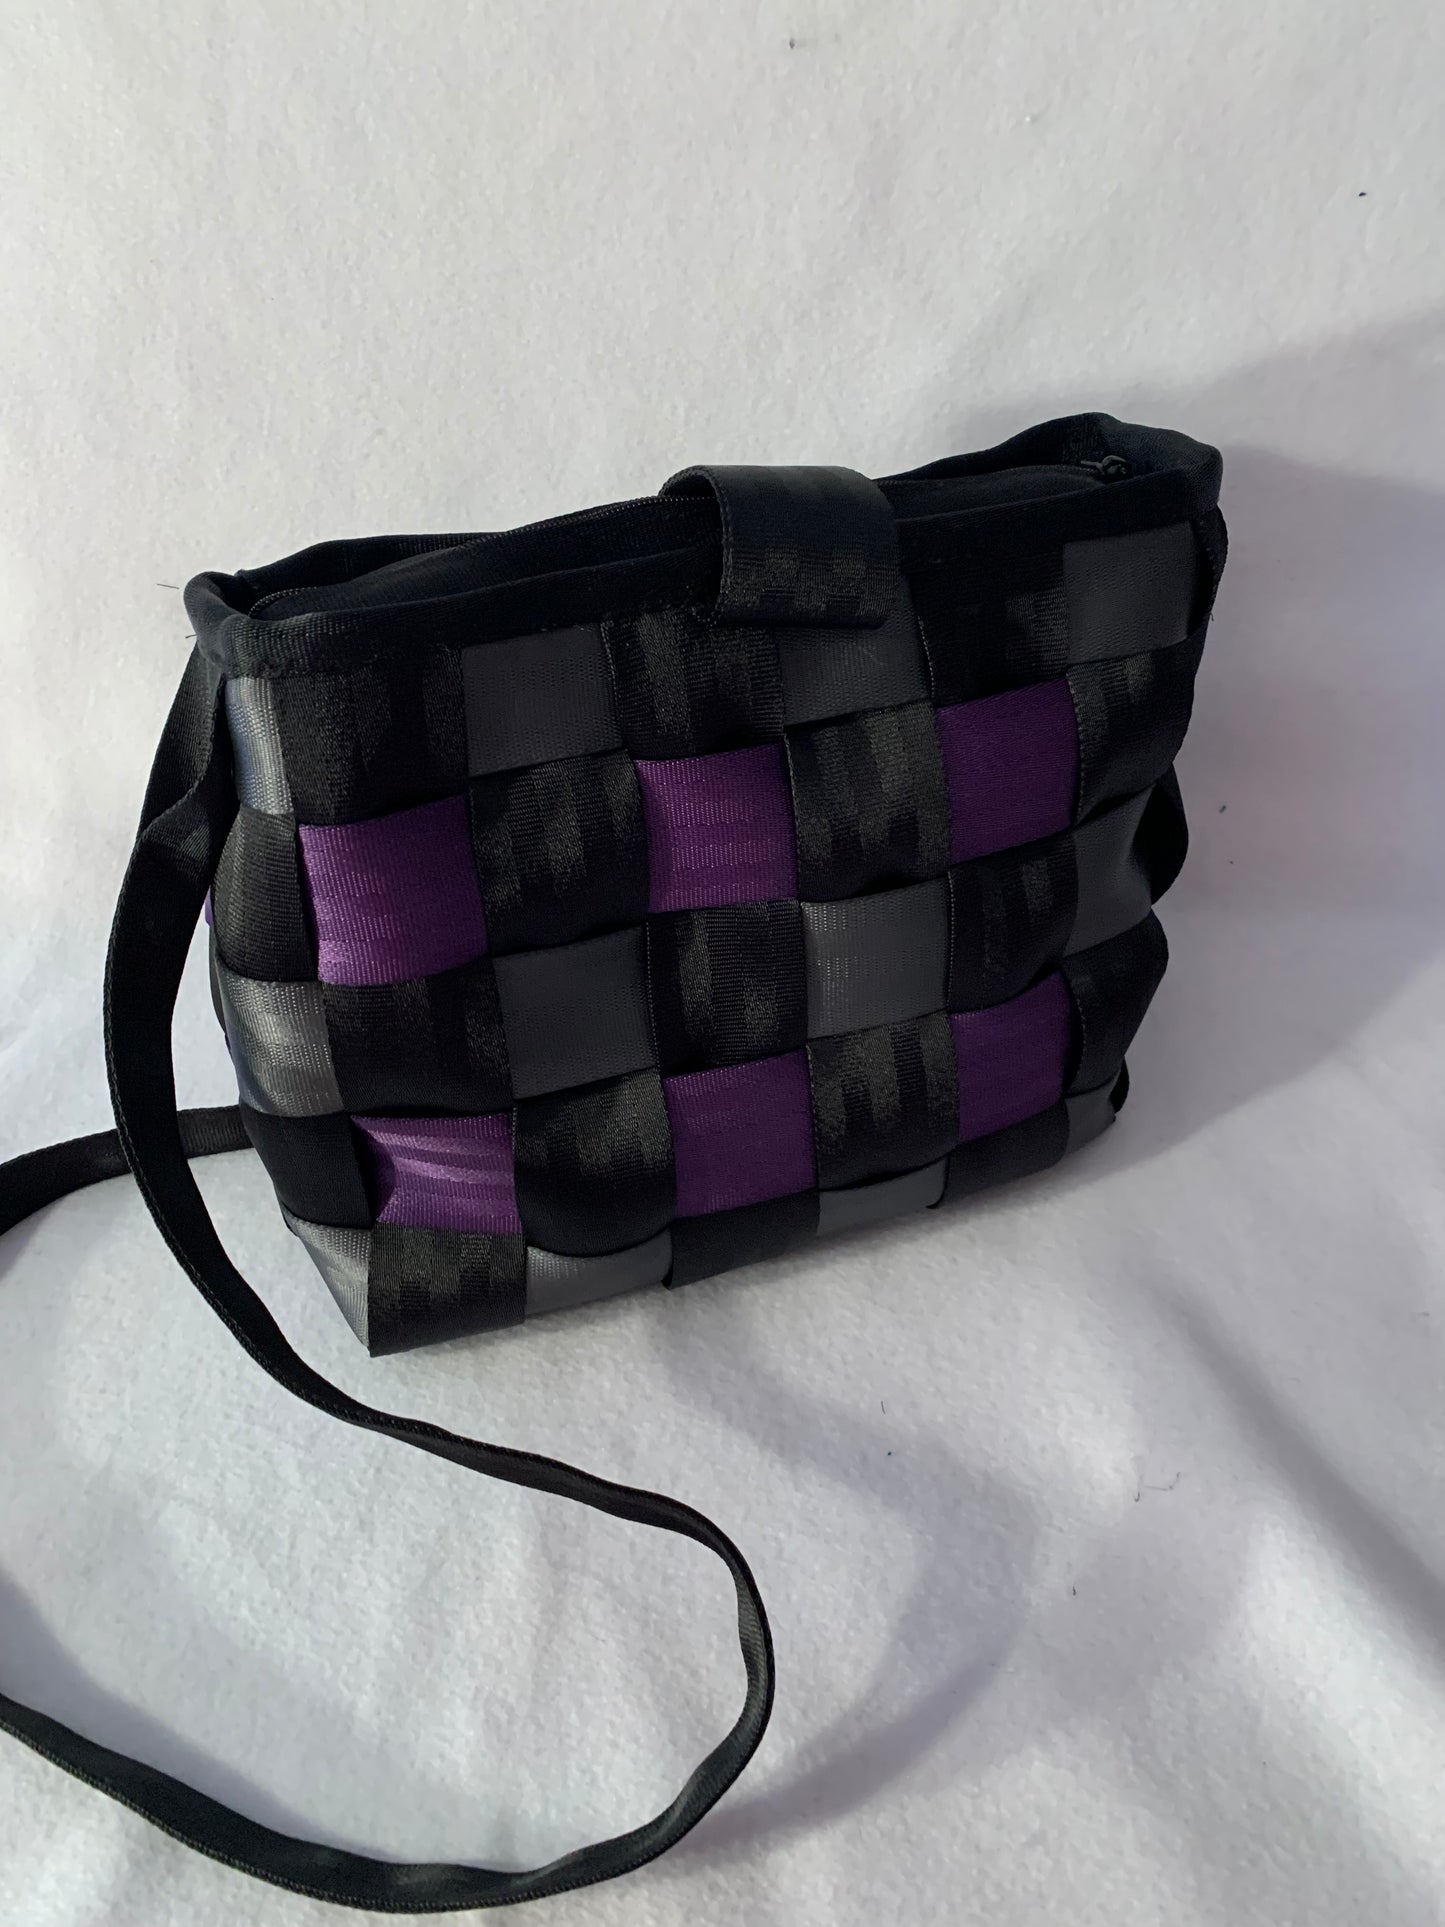 Cross Body Seat Belt Purse in black, grey and purple with zipper and magnetic snap flap, washable